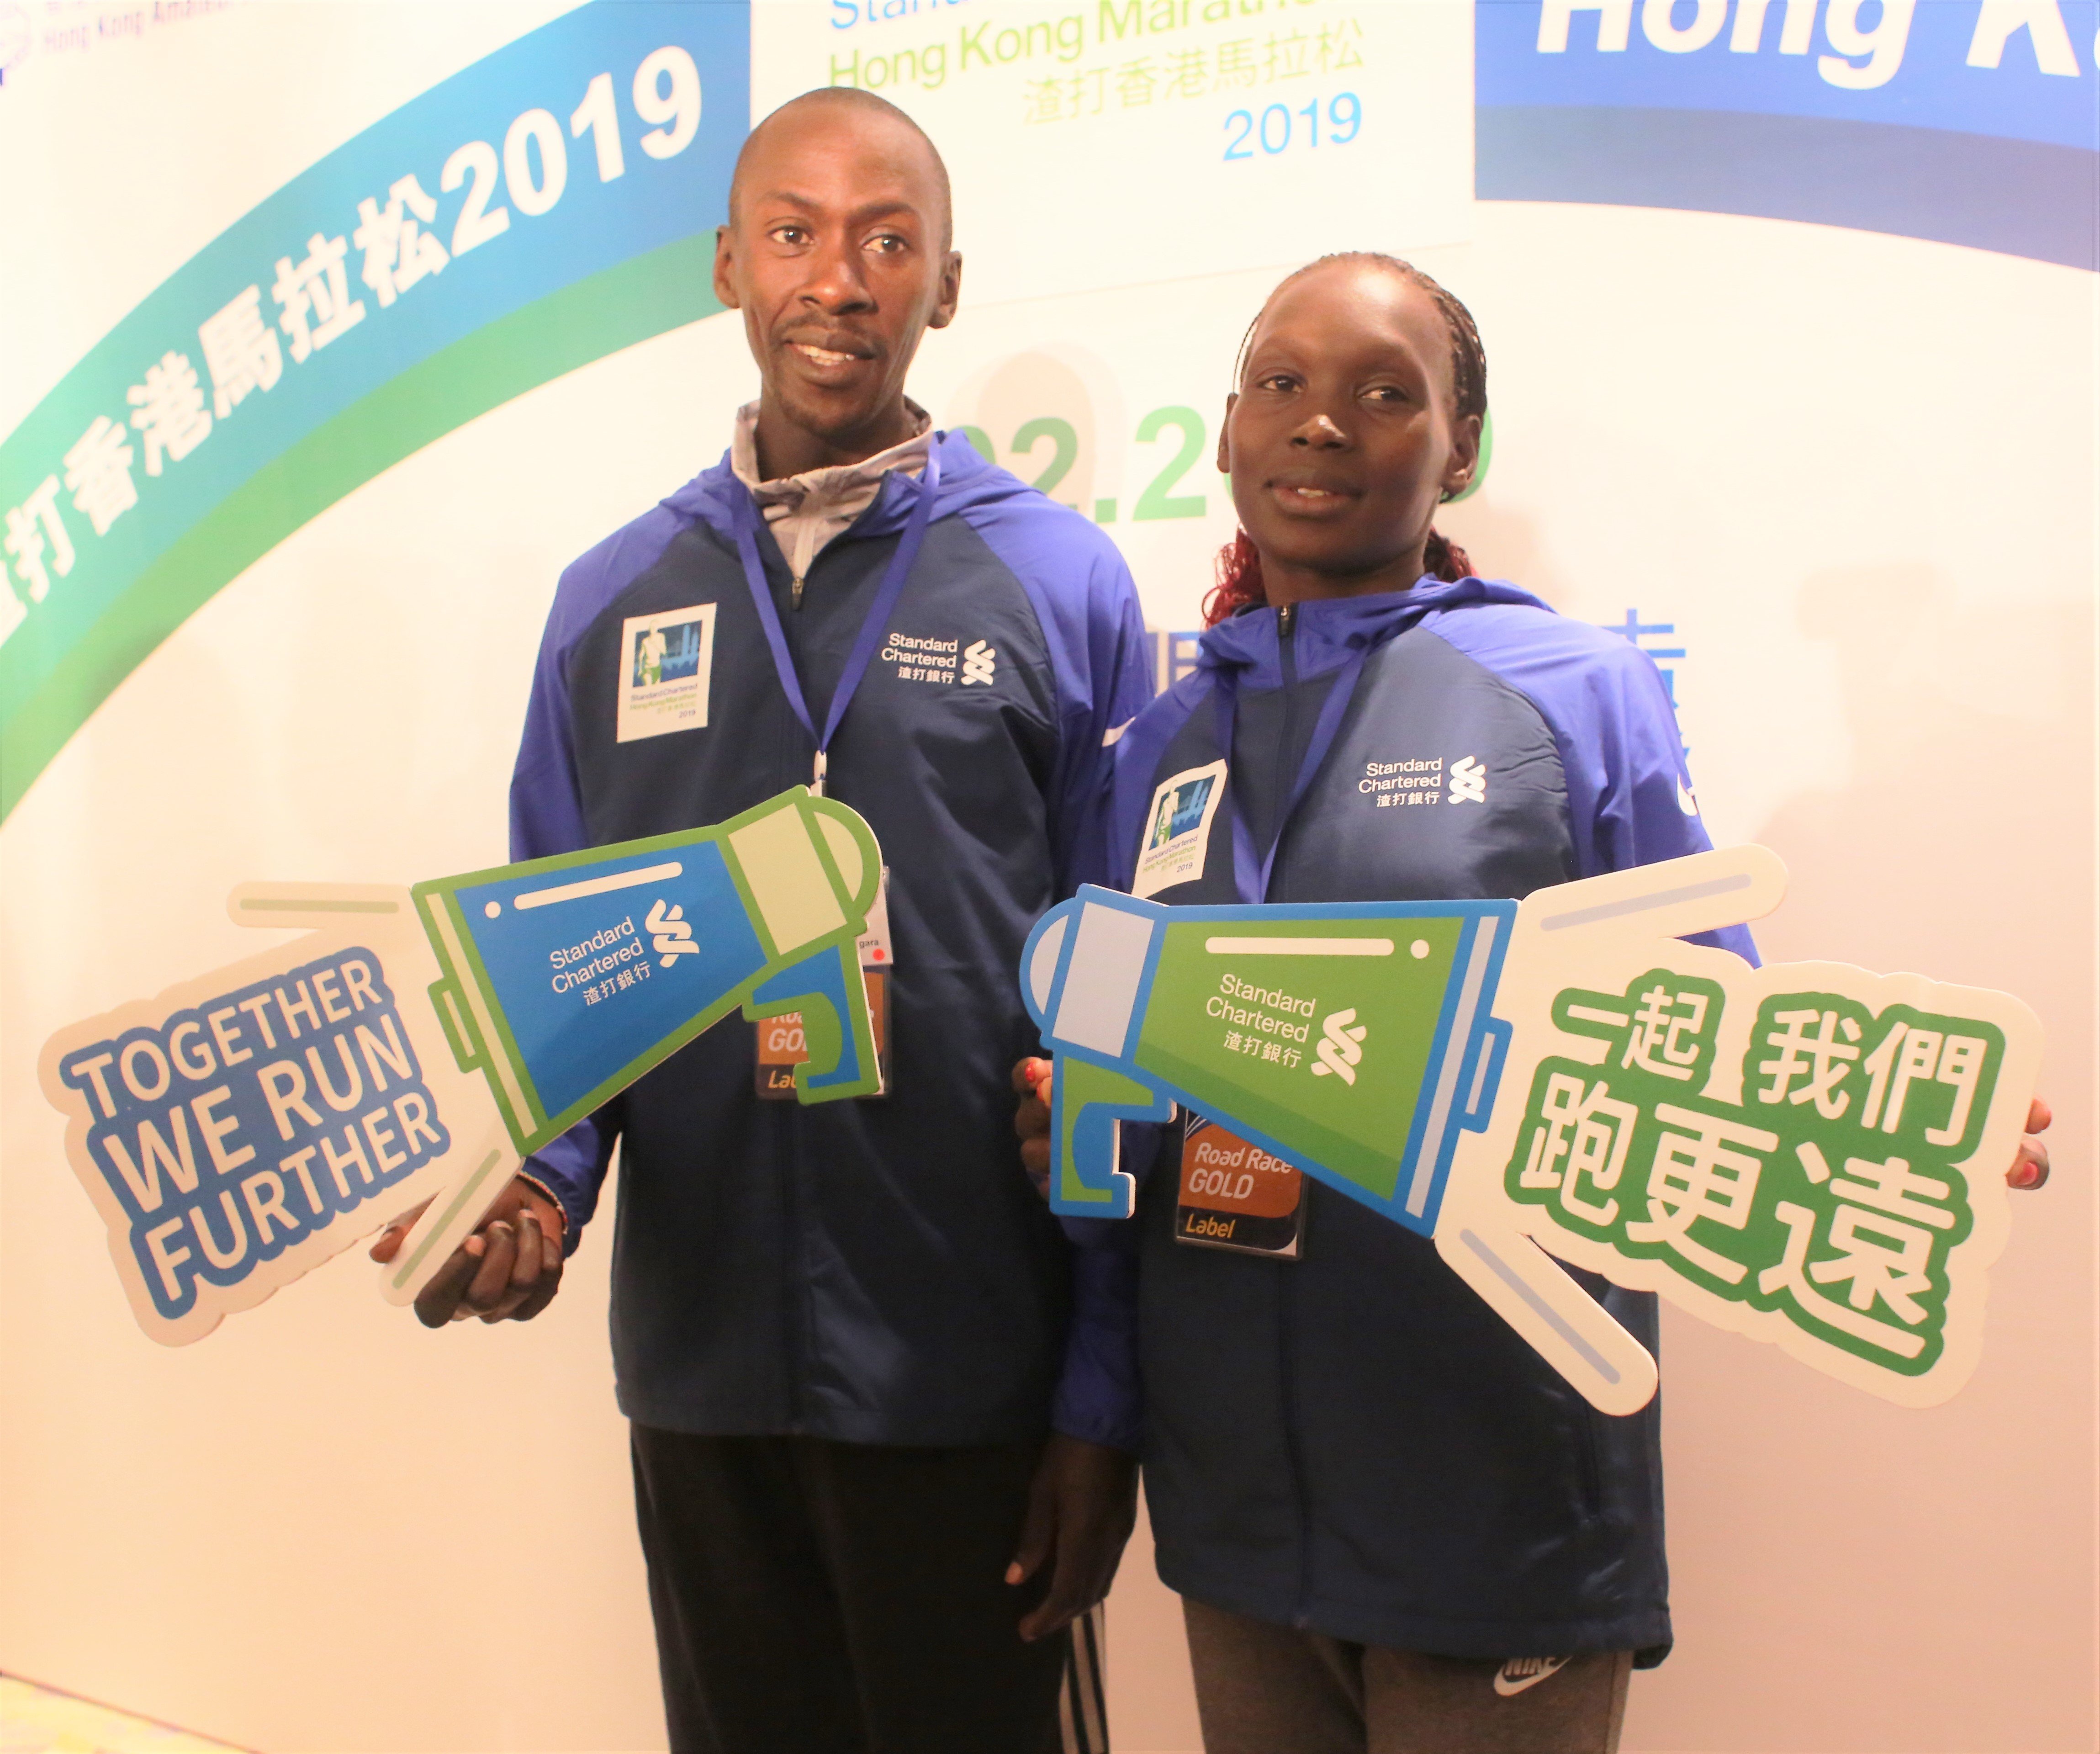 Defending champion Kenneth Mungara (right) and Eunice Chumba during a press conference on Friday. Photo: Chan Kin-wa